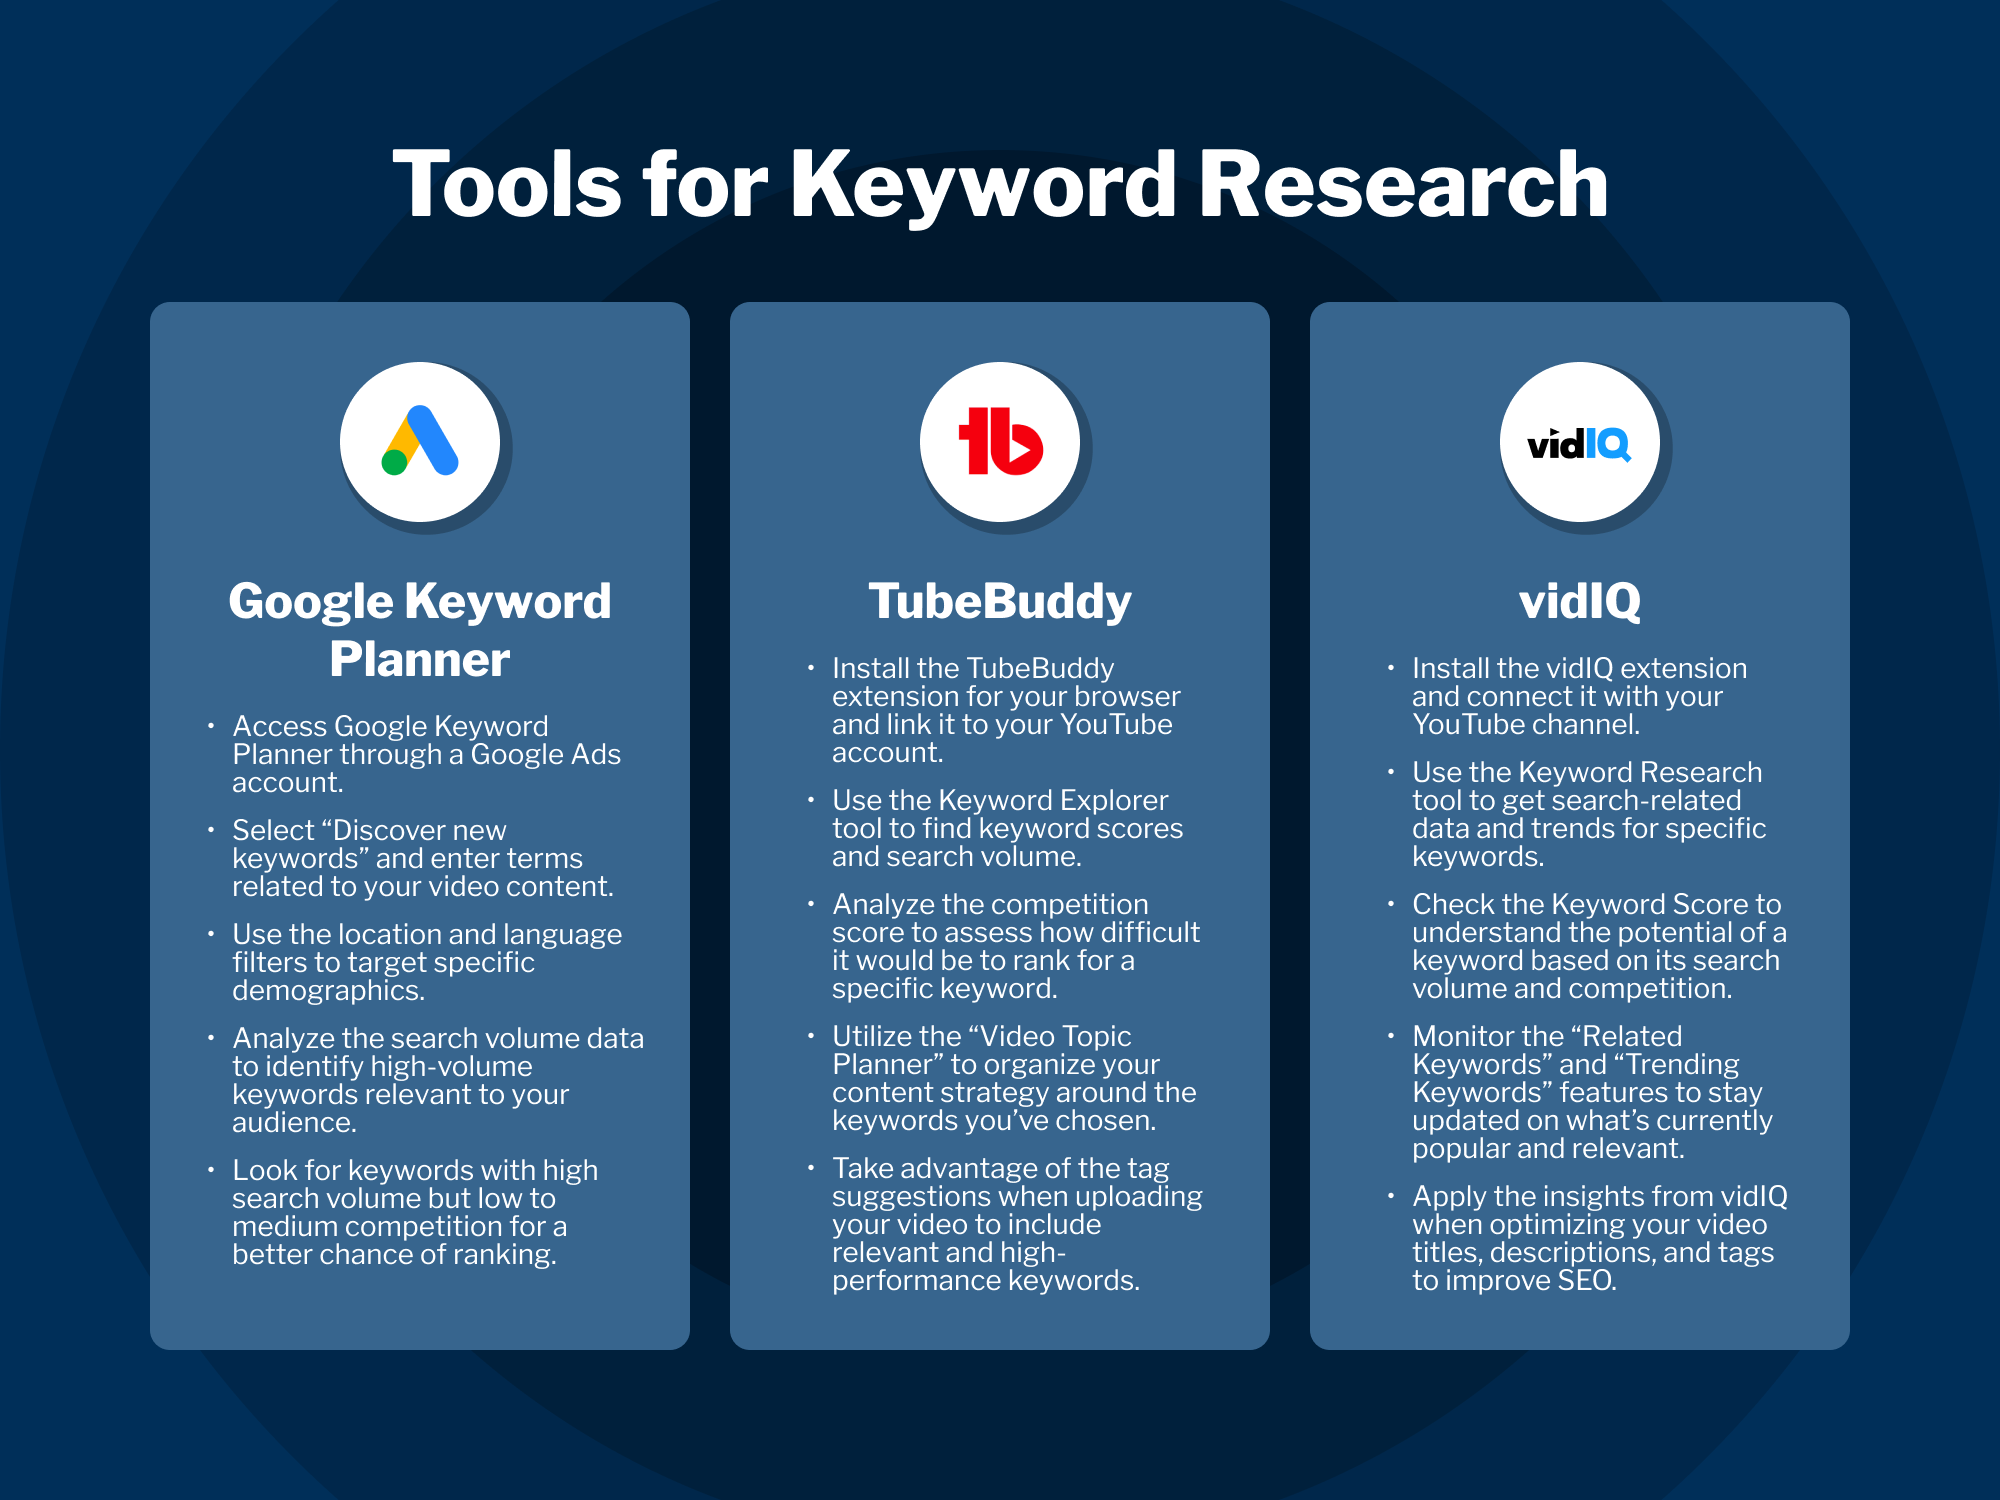 Infographic describing tools for YouTube keyword research: Google Keyword Planner, TubeBuddy, and vidIQ, with their logos and key features.